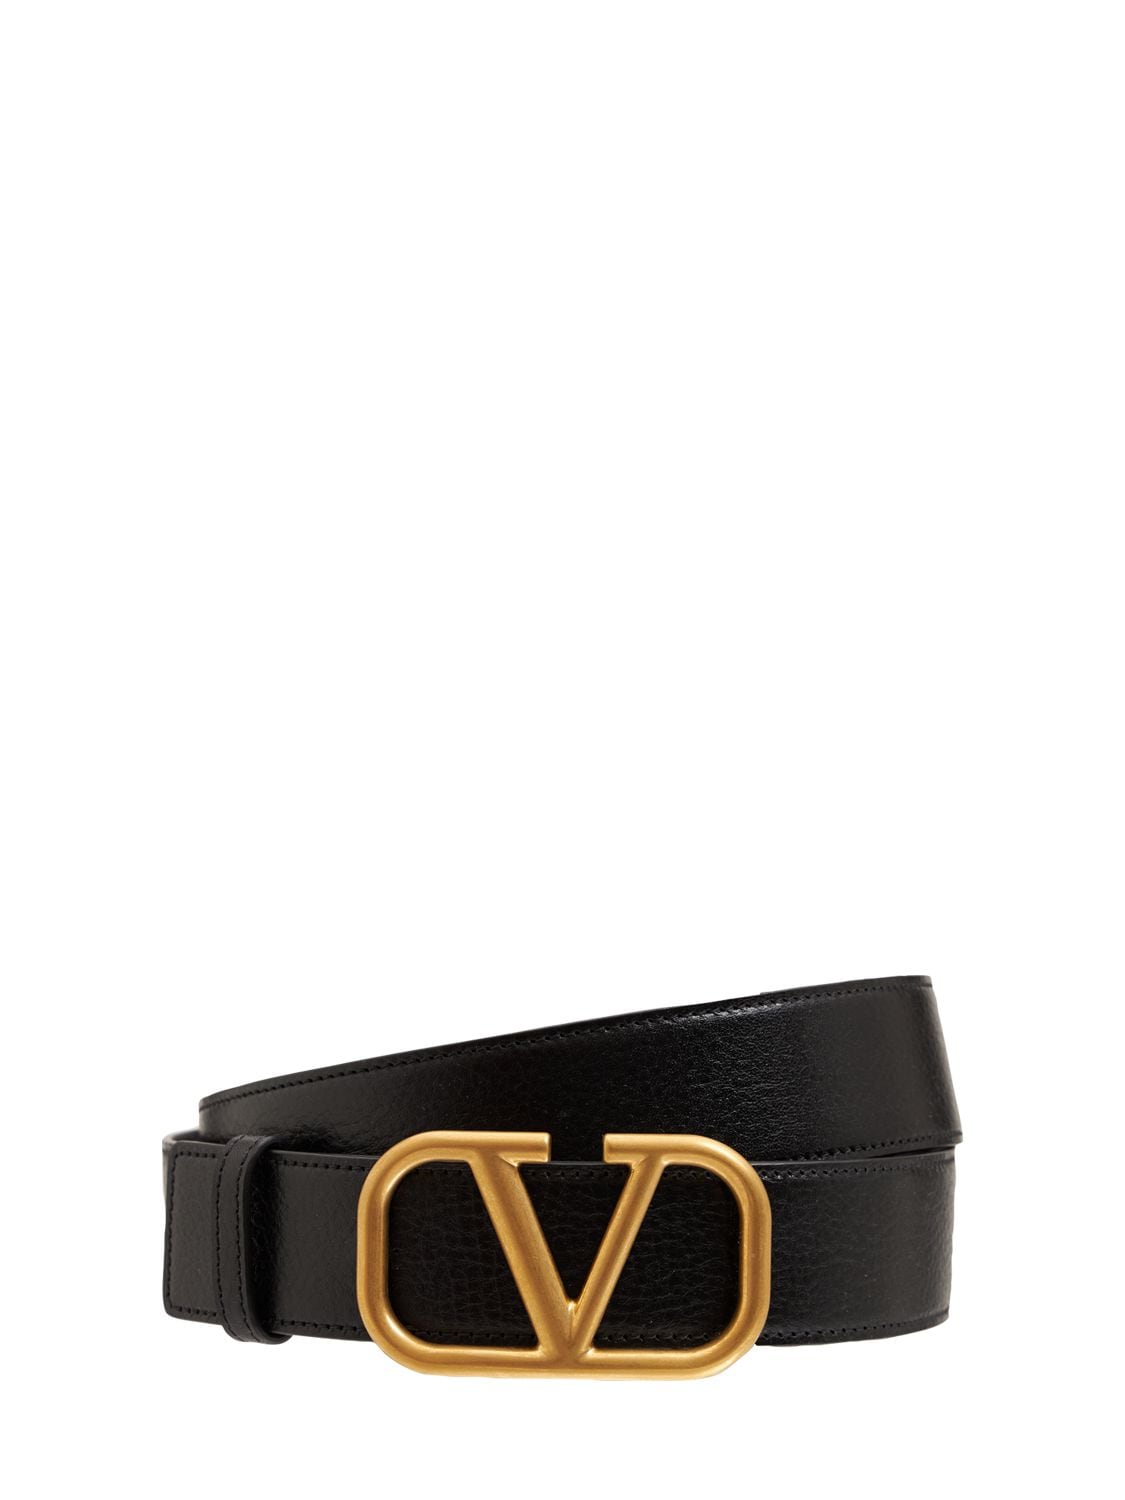 Toile Iconographe Belt With Leather Detailing for Man in Beige/black